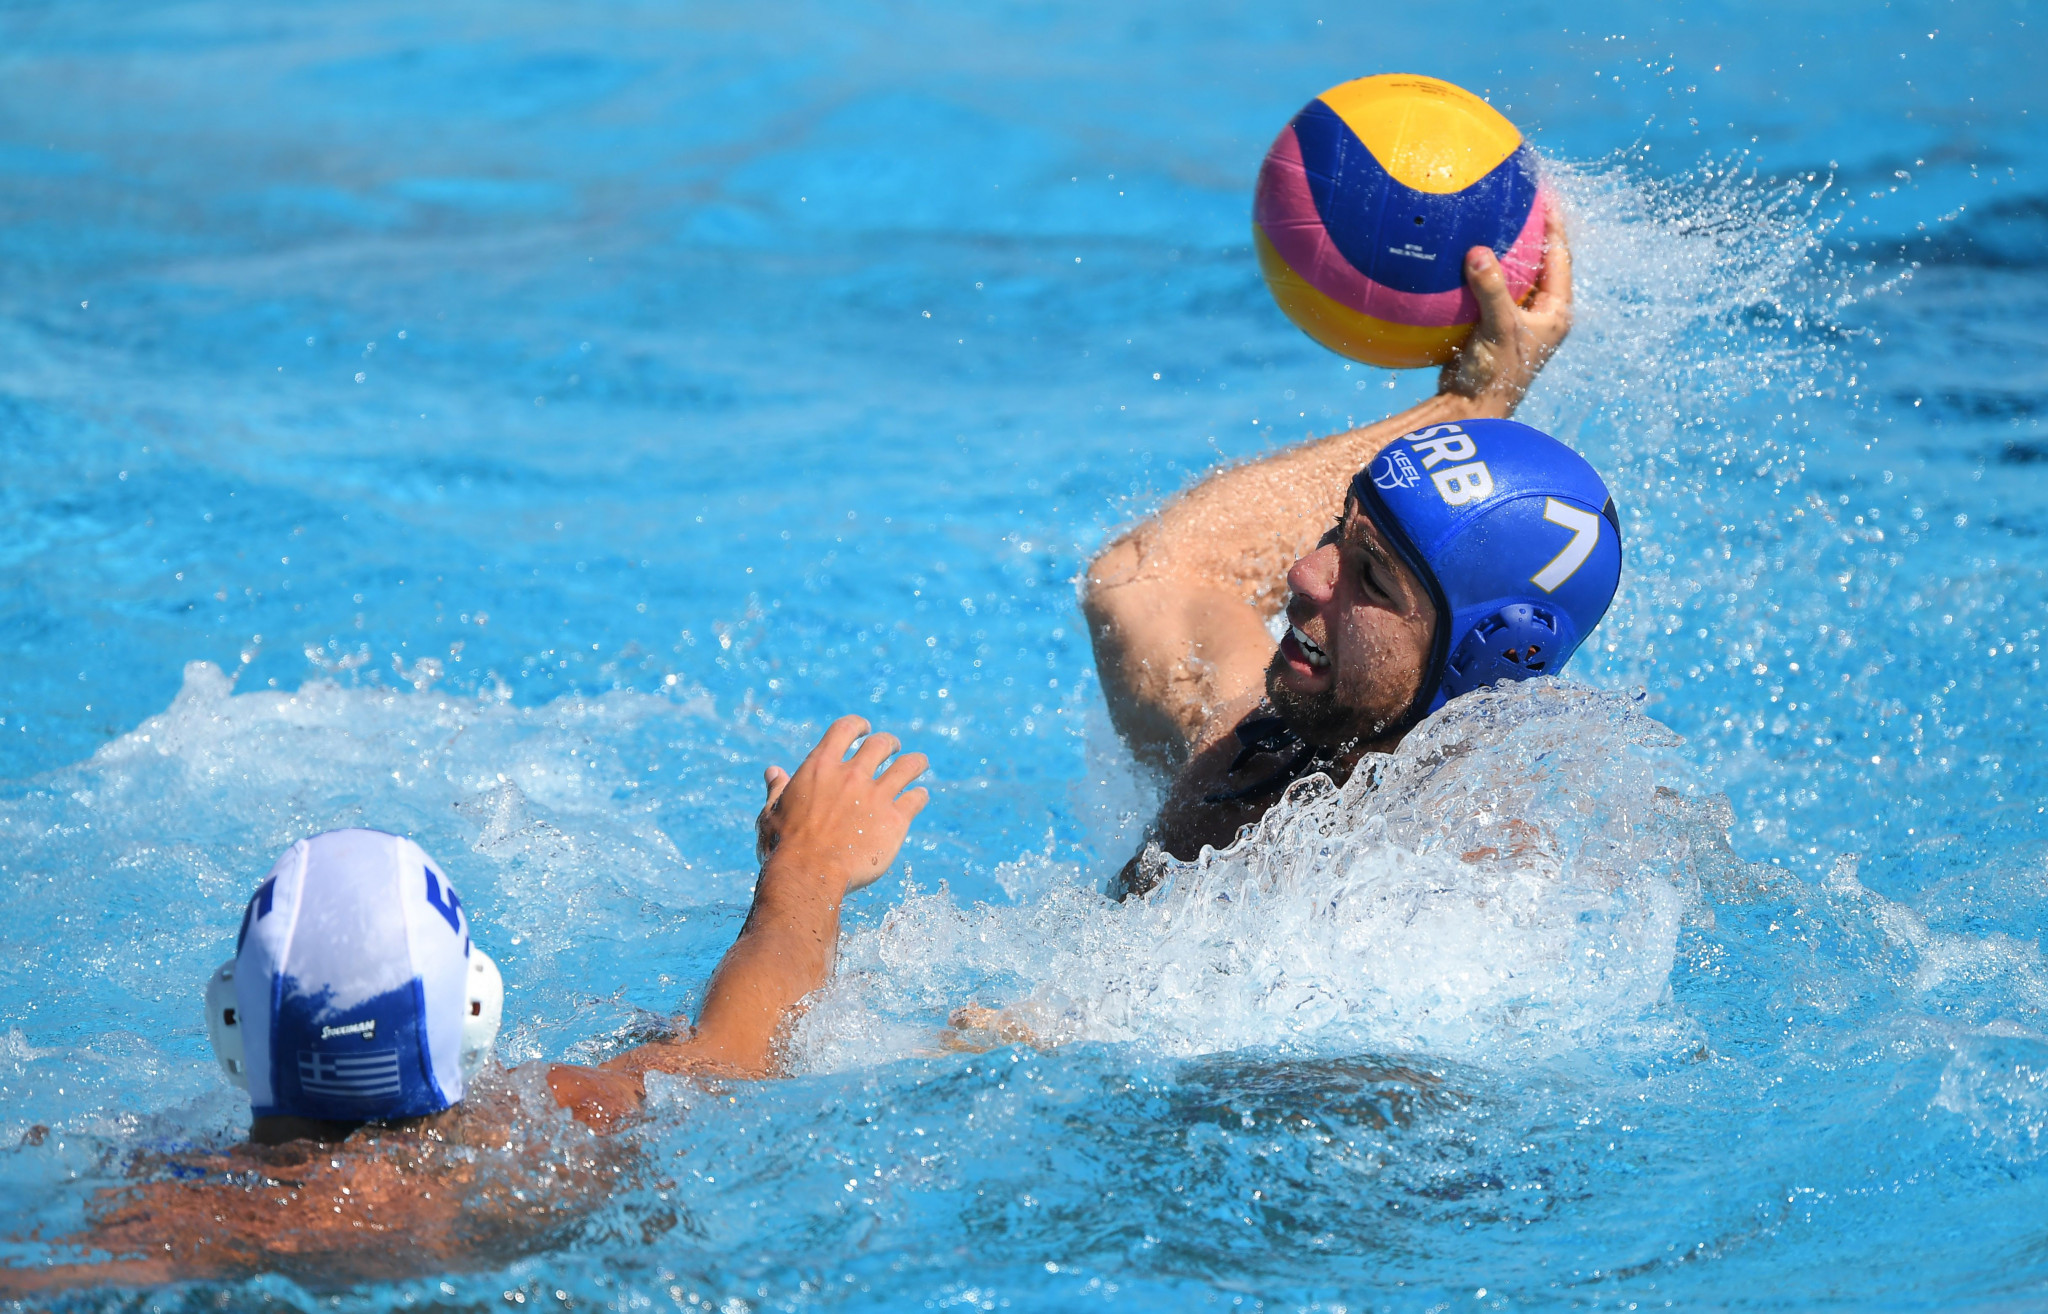 Heavyweights Serbia and Croatia draw at Men's Water Polo World Cup